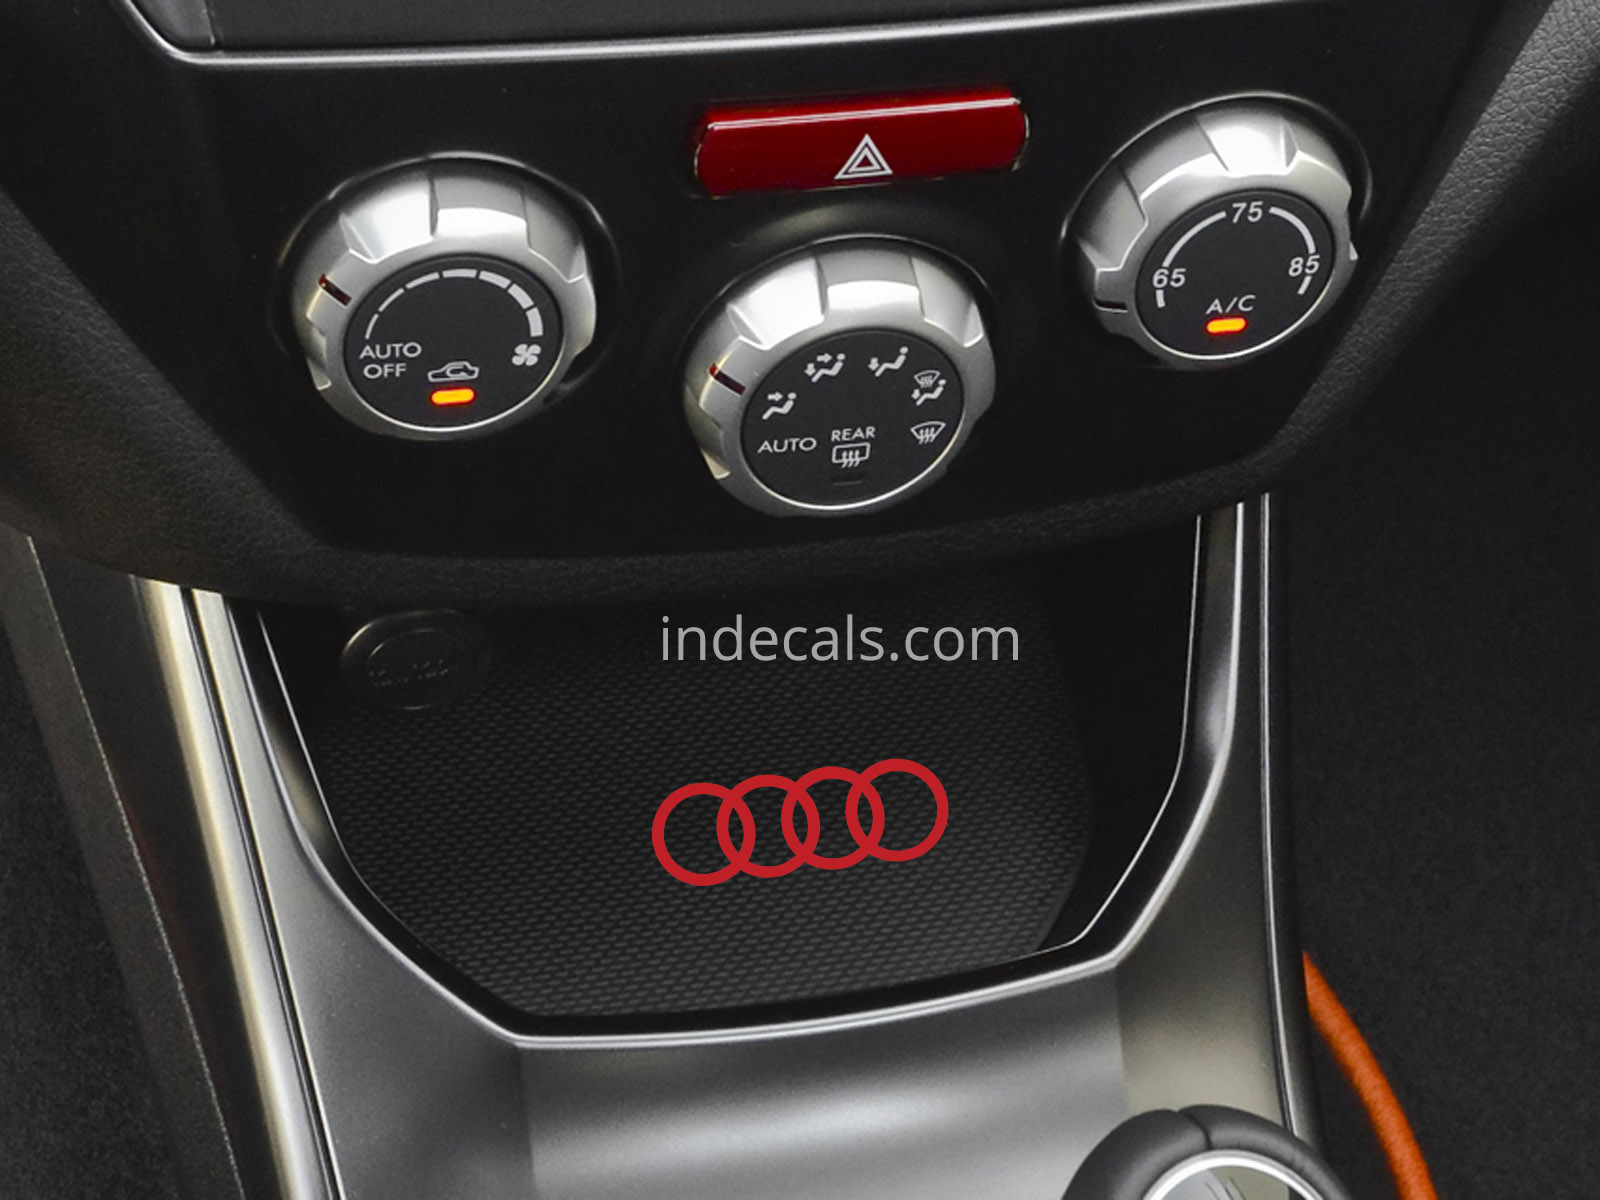 3 x Audi Rings Stickers for Ashtray - Red